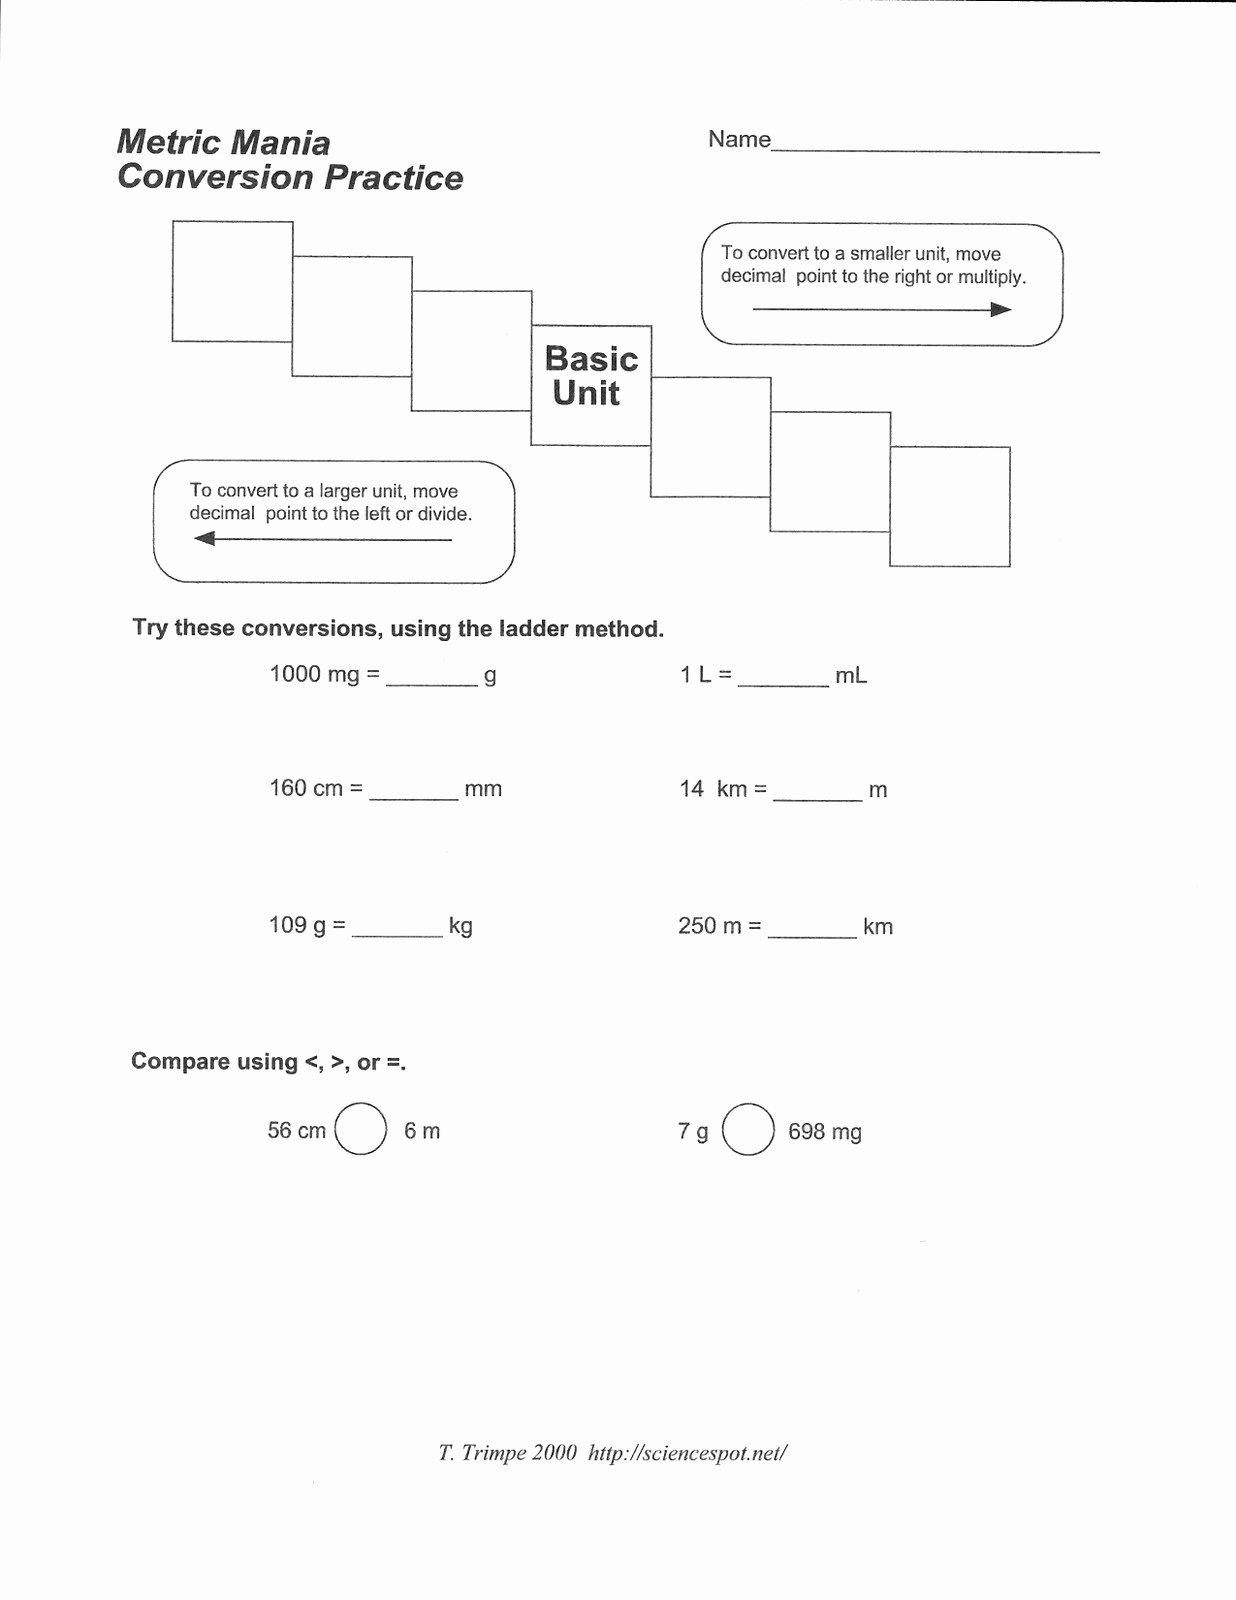 Metric Mania Worksheet Answers Lovely Science Class Metric Mania Conversion Practice